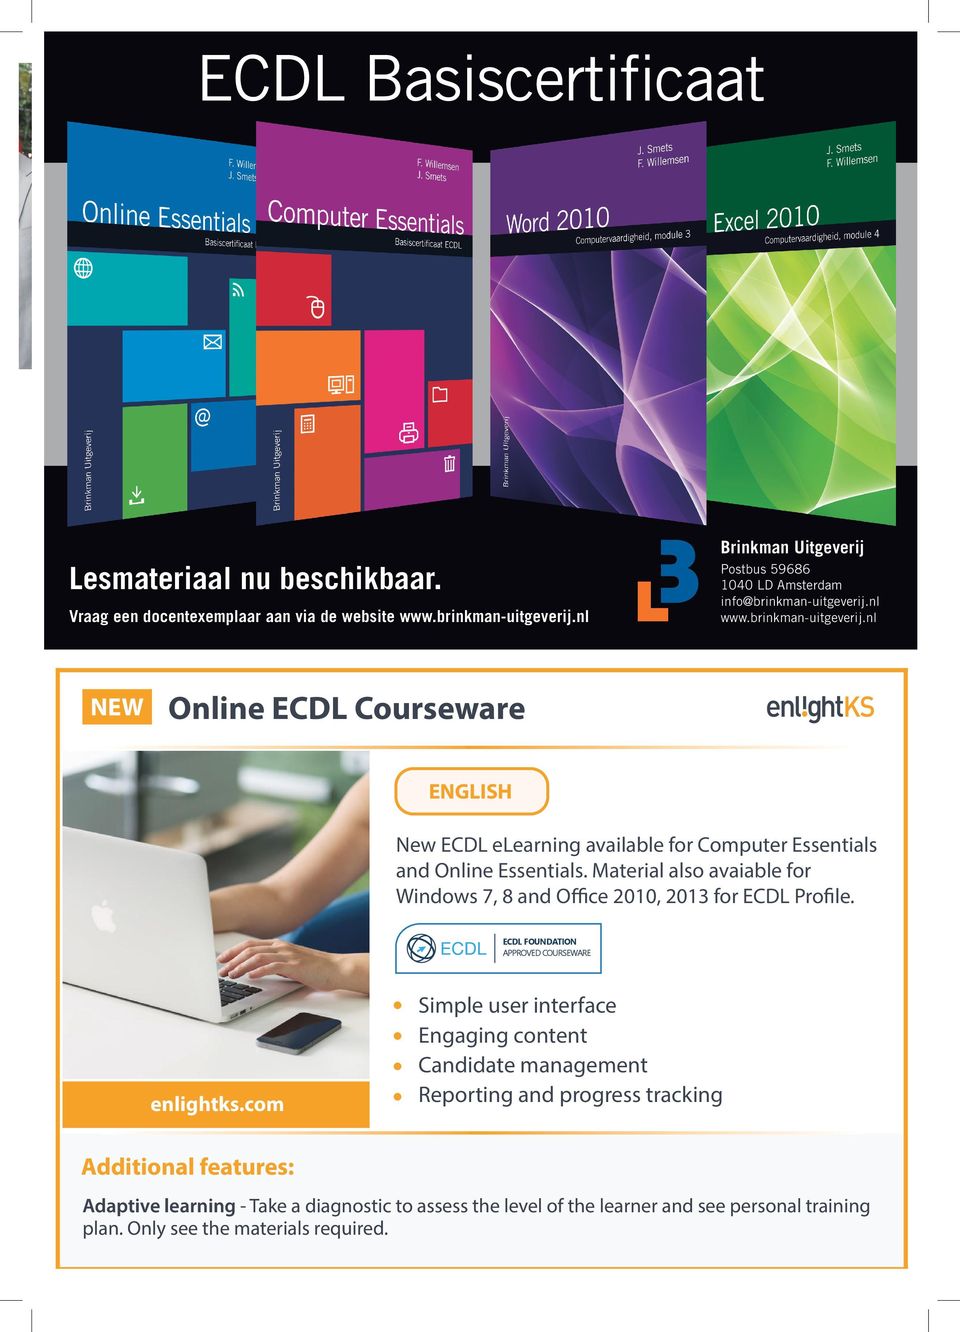 Material also avaiable for Windows 7, 8 and Office 2010, 2013 for ECDL Profile. ECDL FOUNDATION APPROVED COURSEWARE enlightks.